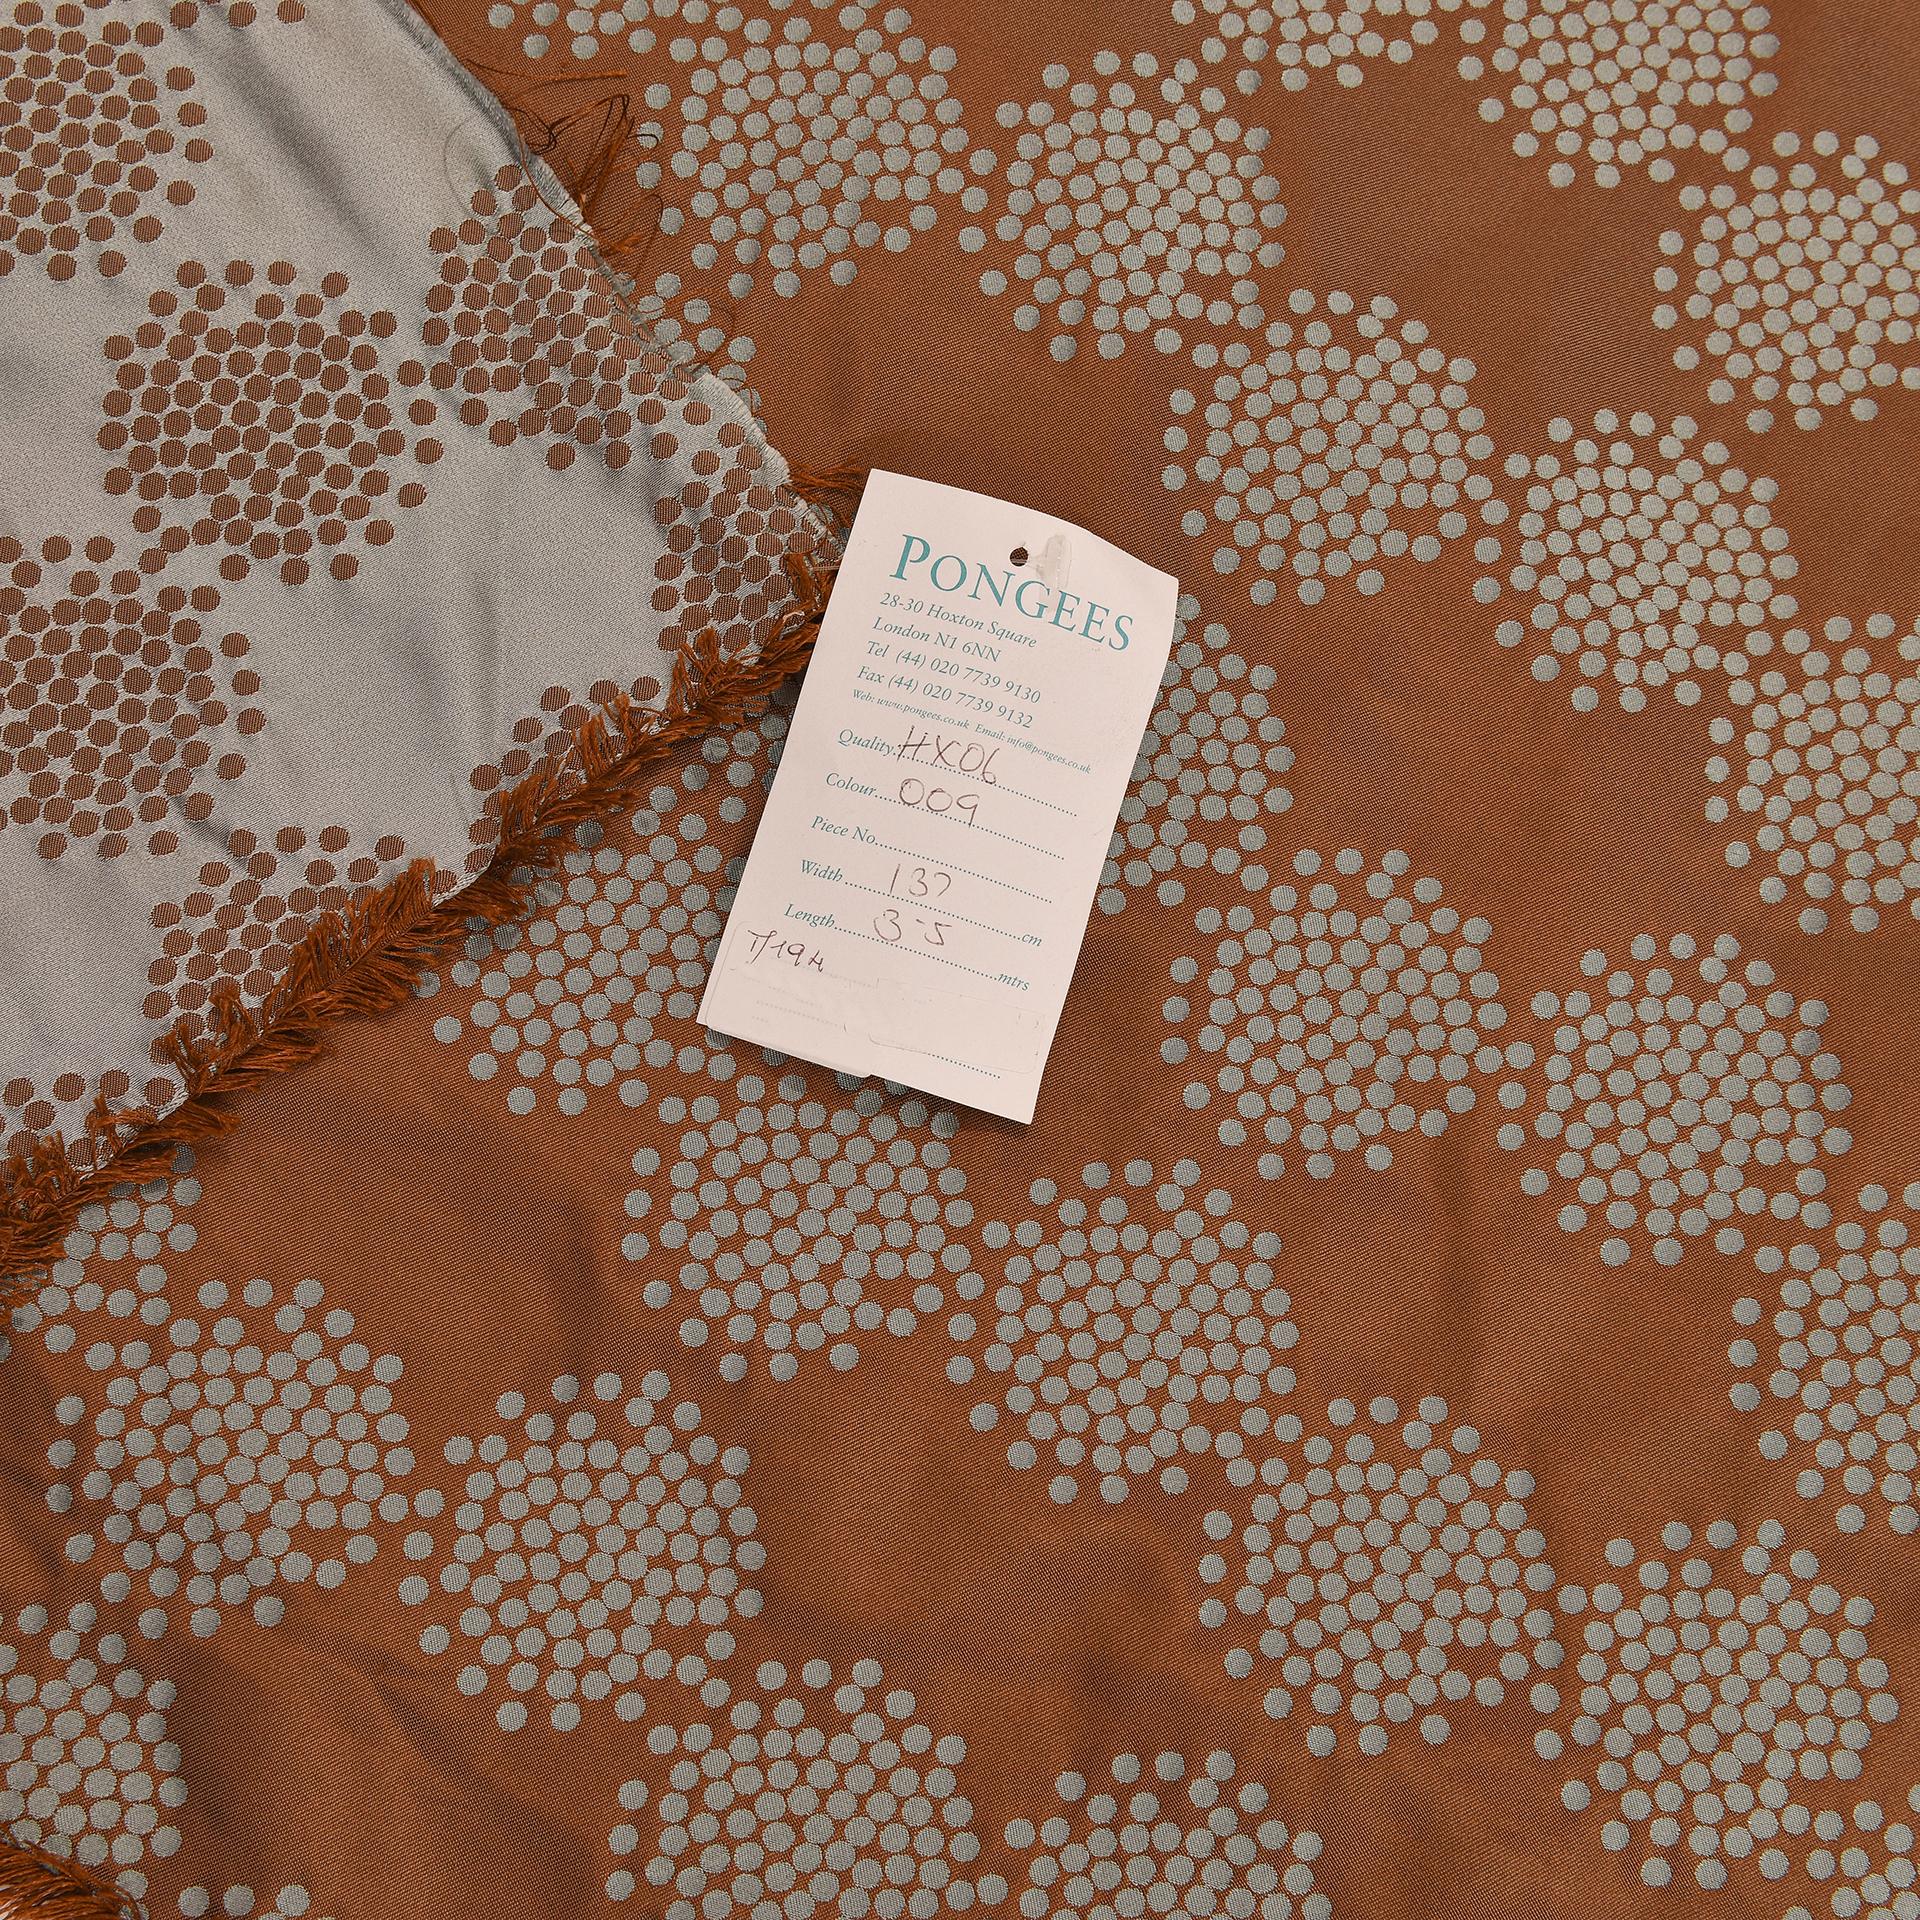 T/194 - Elegant blue and bronze silk for curtains, named PONGEES (English company may be).
Blue and bronze silk for curtains : small bronze circles on a delicate elegant light blue. Ideal for a tent or the headborad of a bed. 
Price interesting